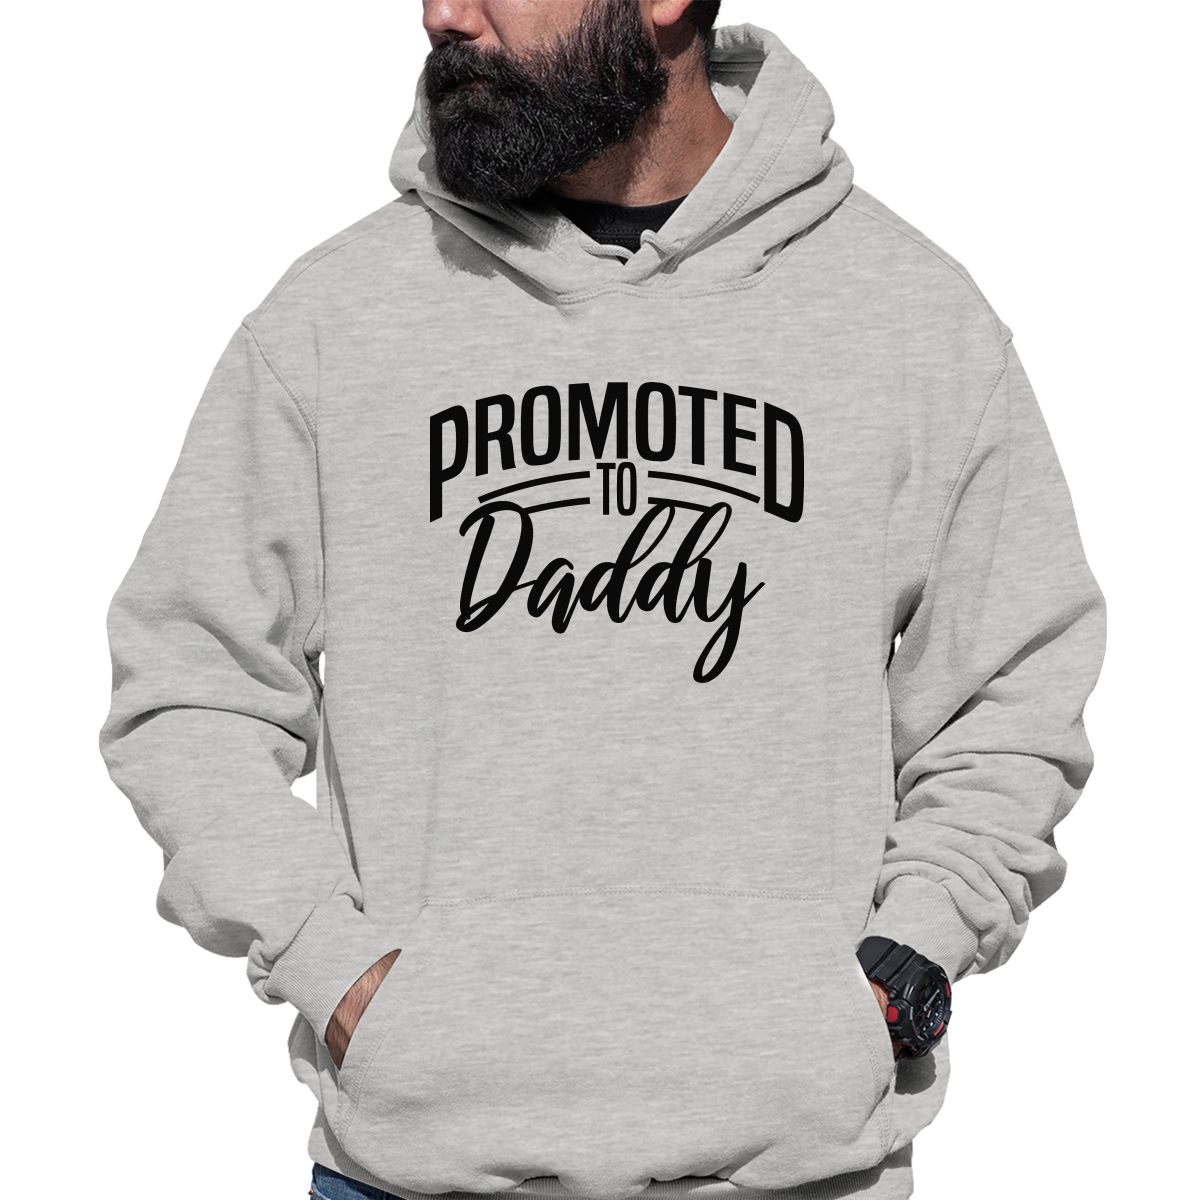 Promoted to daddy Unisex Hoodie | Gray